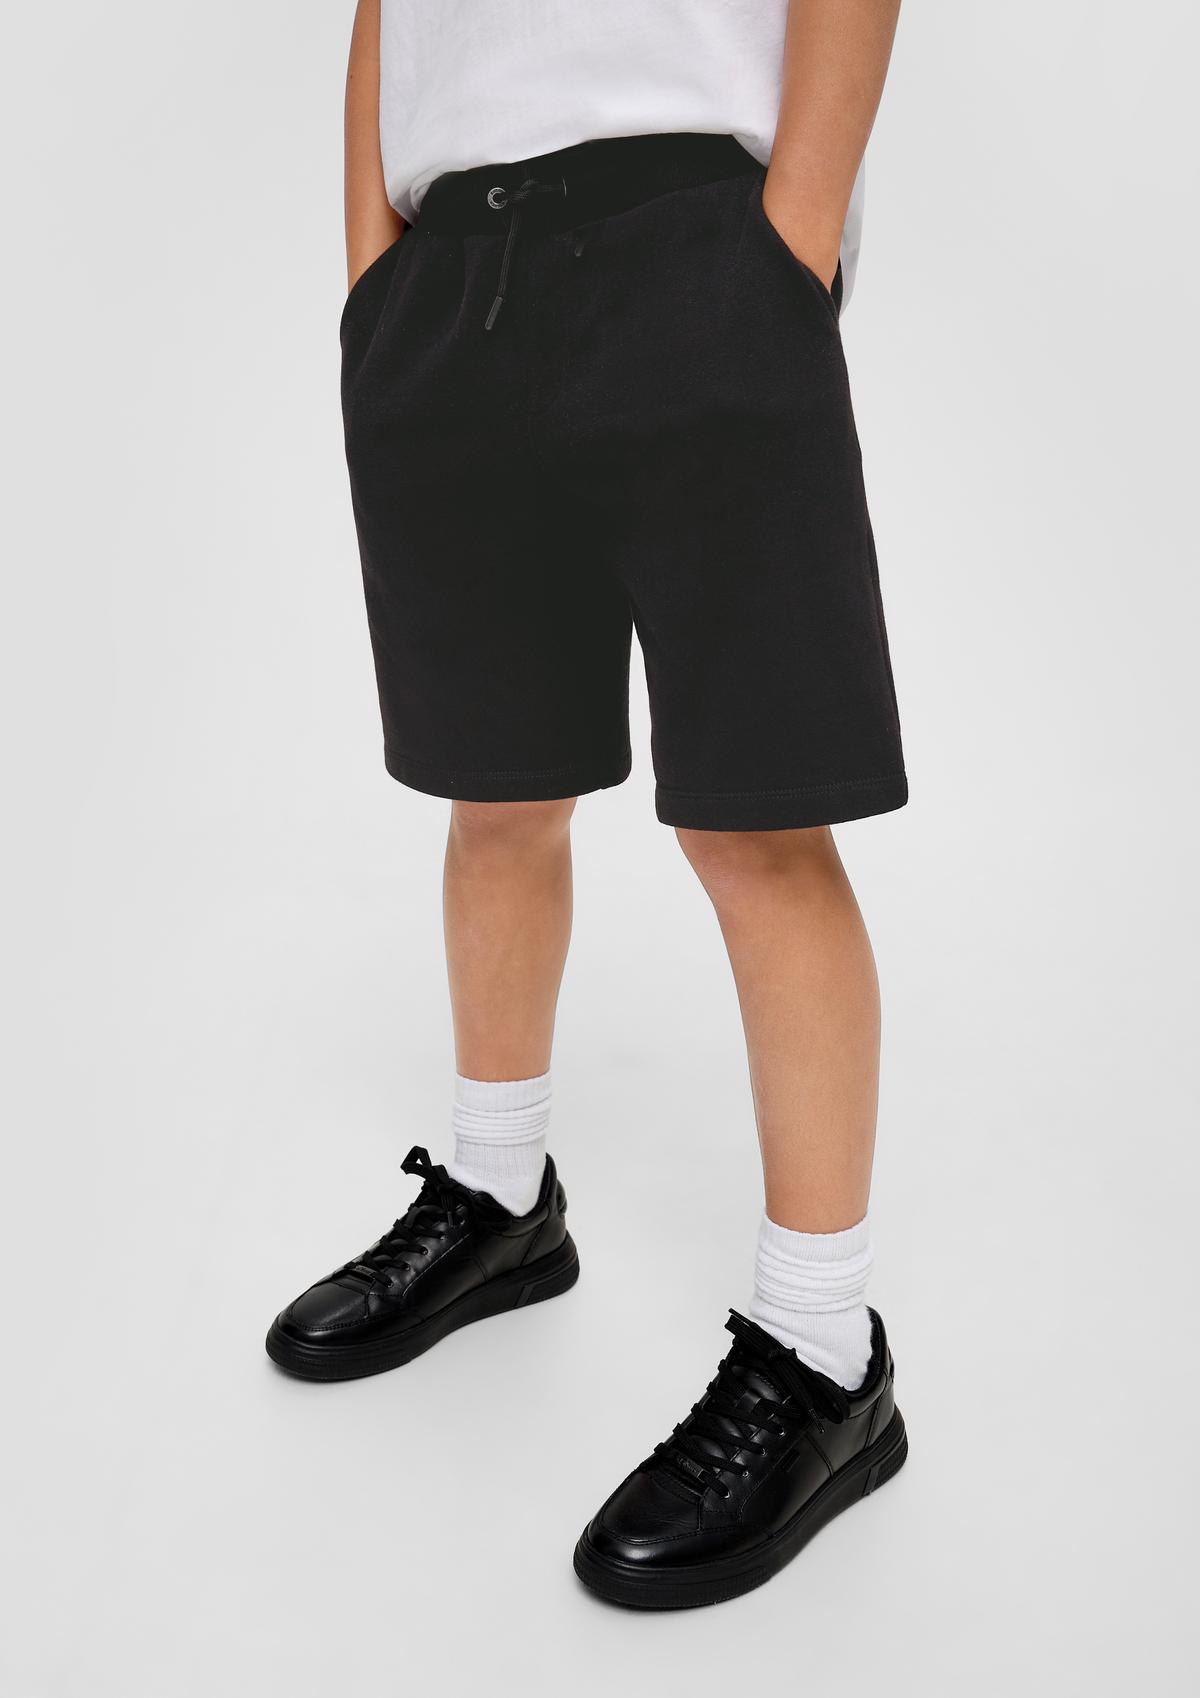 Find Bermuda shorts for boys and online teens